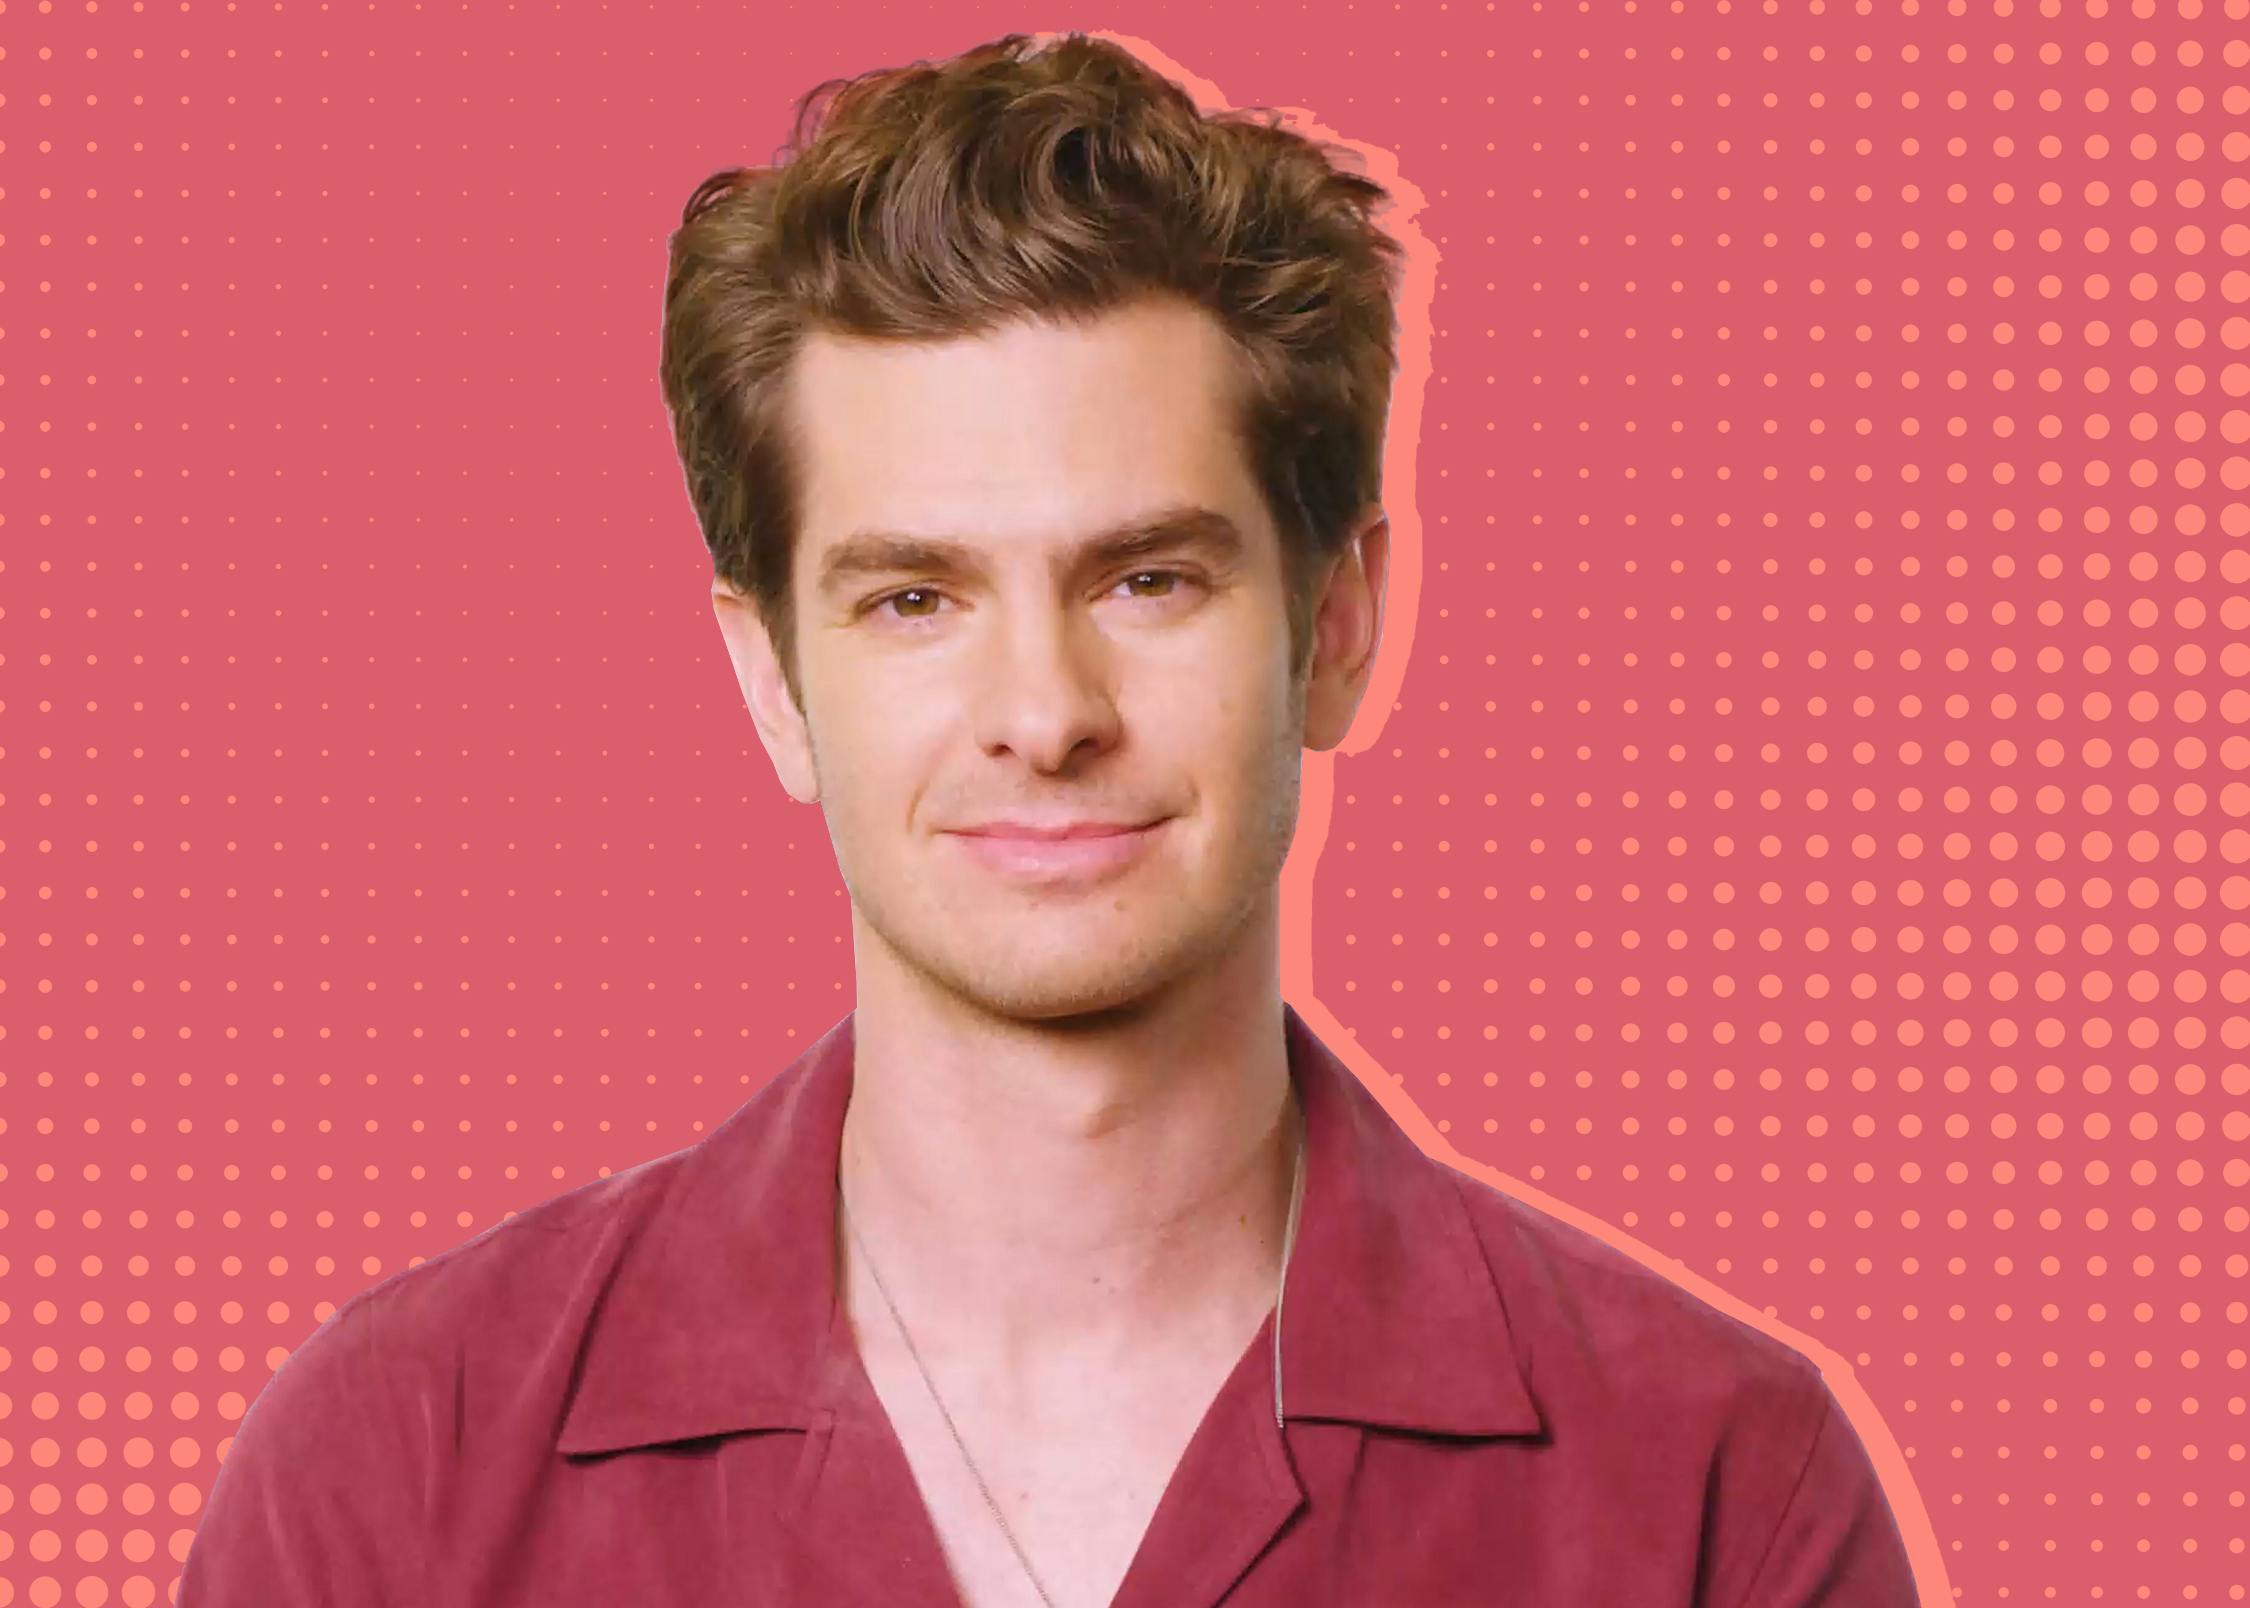 Andrew Garfield wears a red shirt and silver necklace. Behind him is a pink and red dotted treated background.